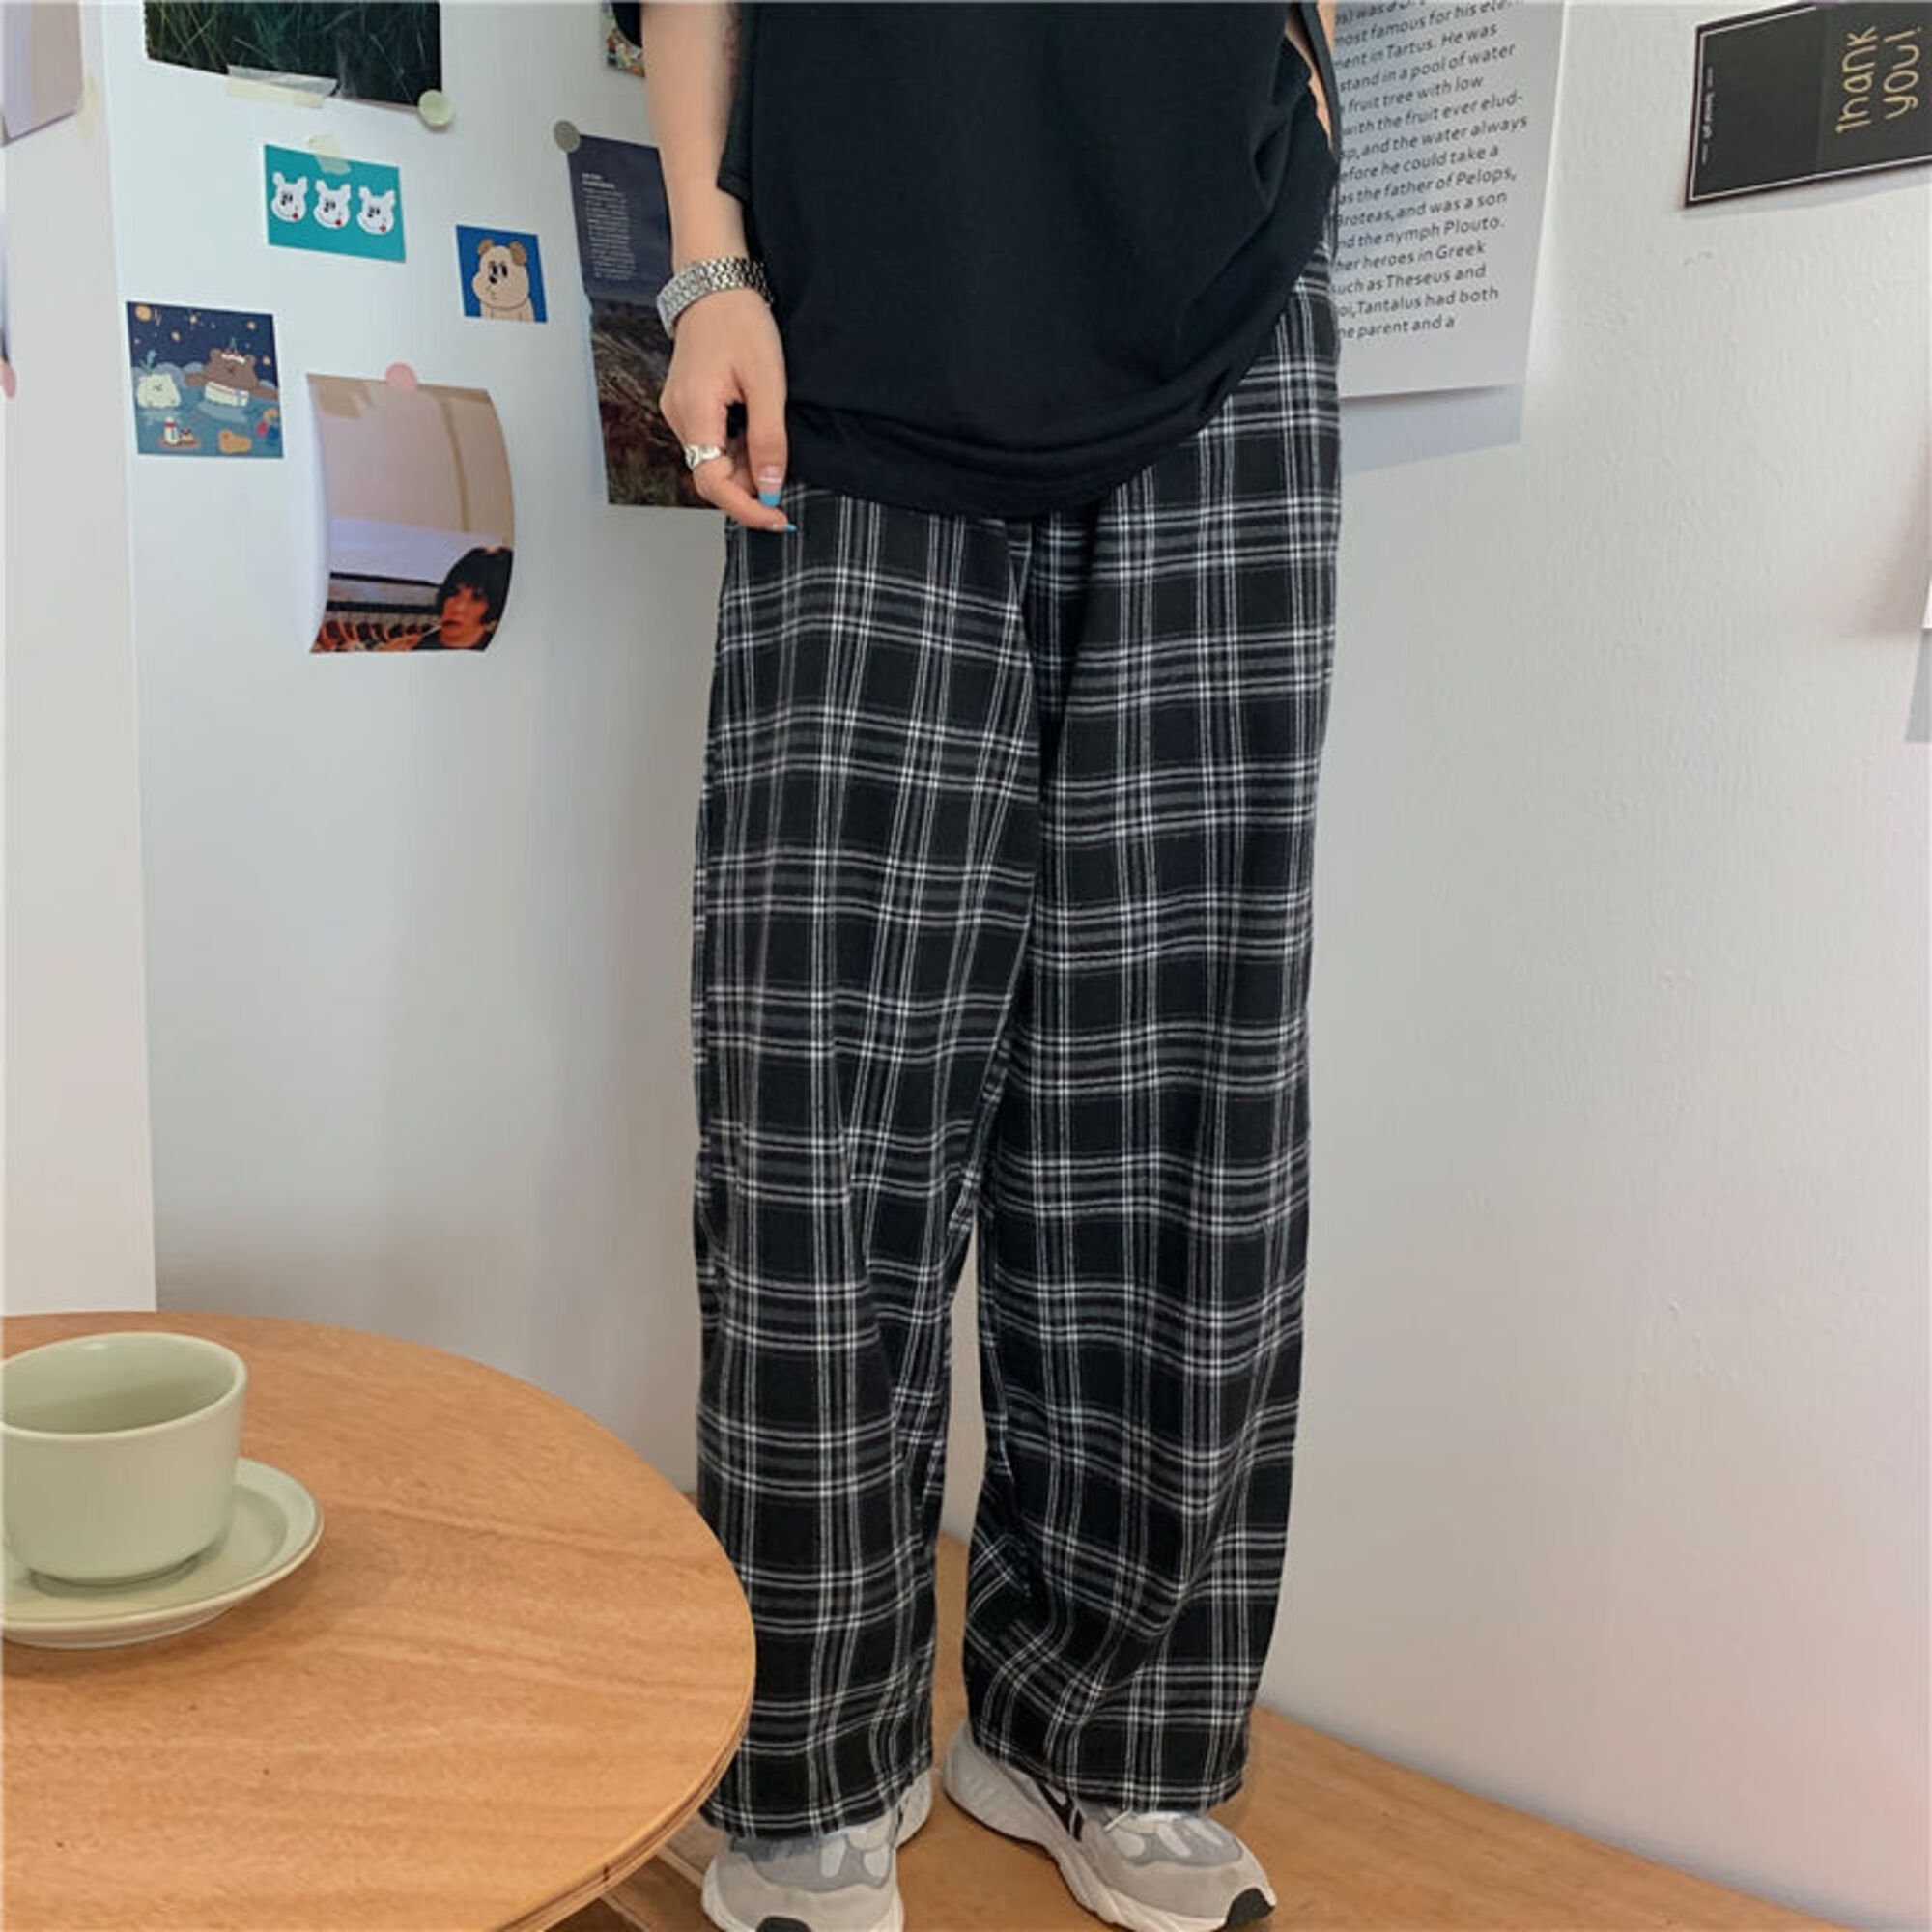 S 3xl Plaid Pants Women Casual Loose Wide Leg Trousers With Pocket Ins Retro Teens Straight Trousers Hip Hop Unisex Streetwear